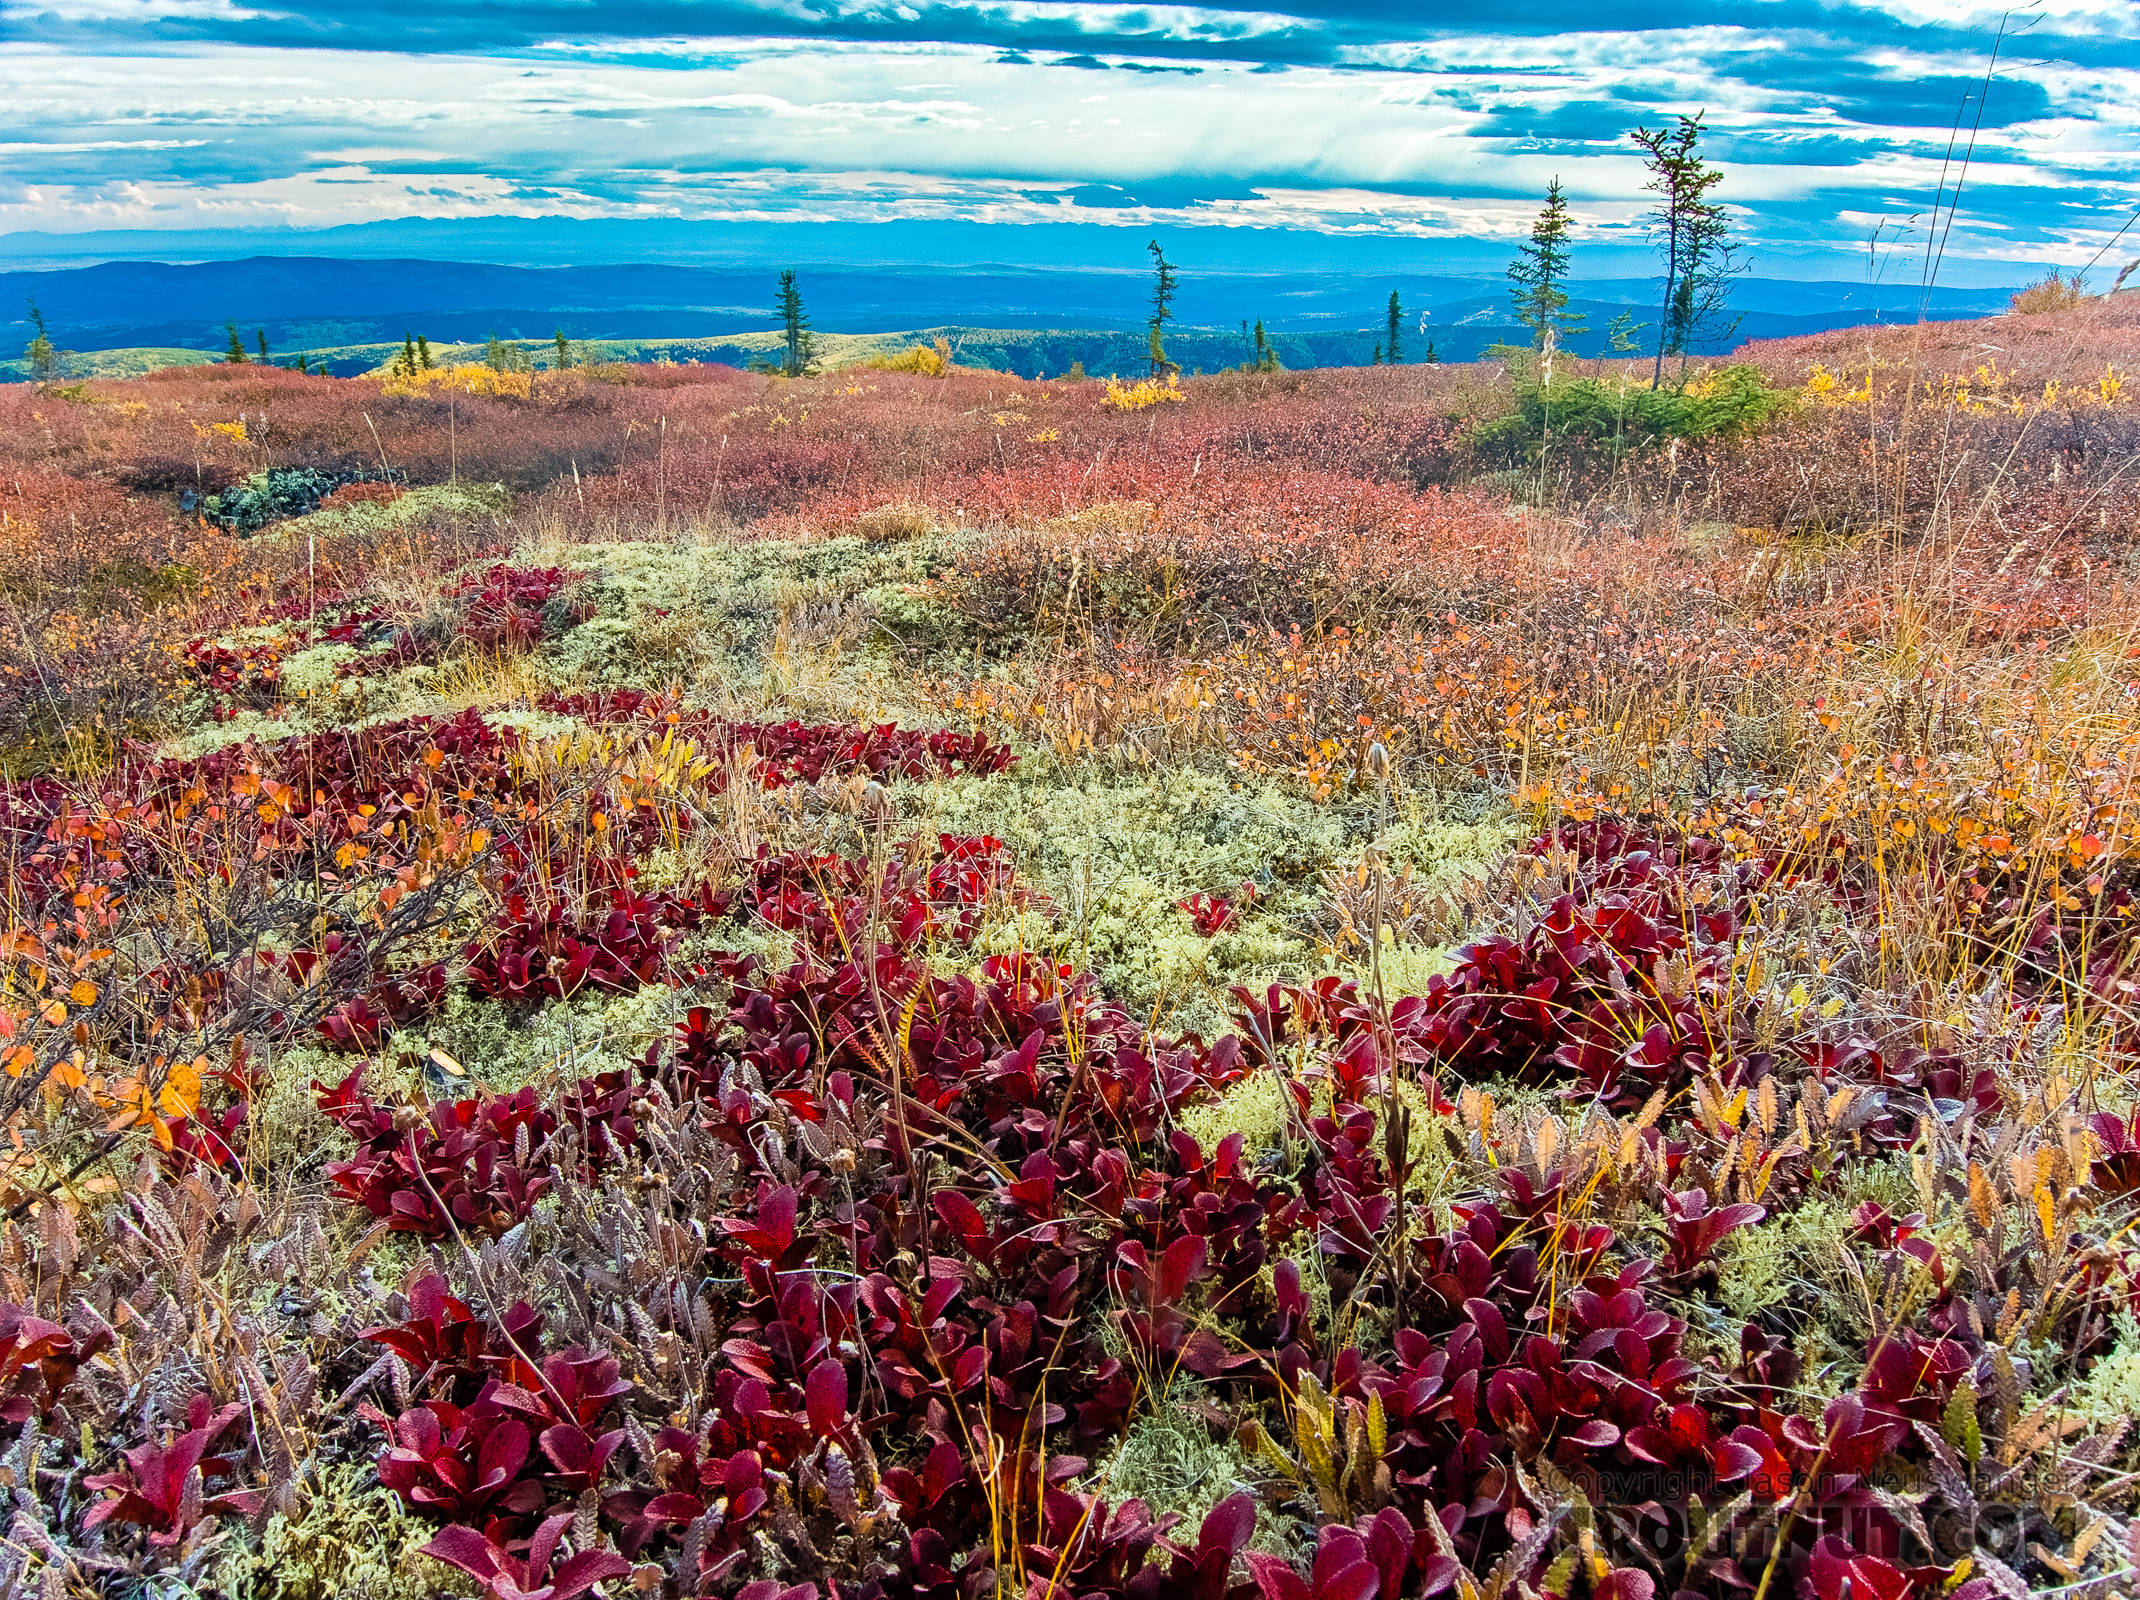 Sunny fall colors From Murphy Dome in Alaska.